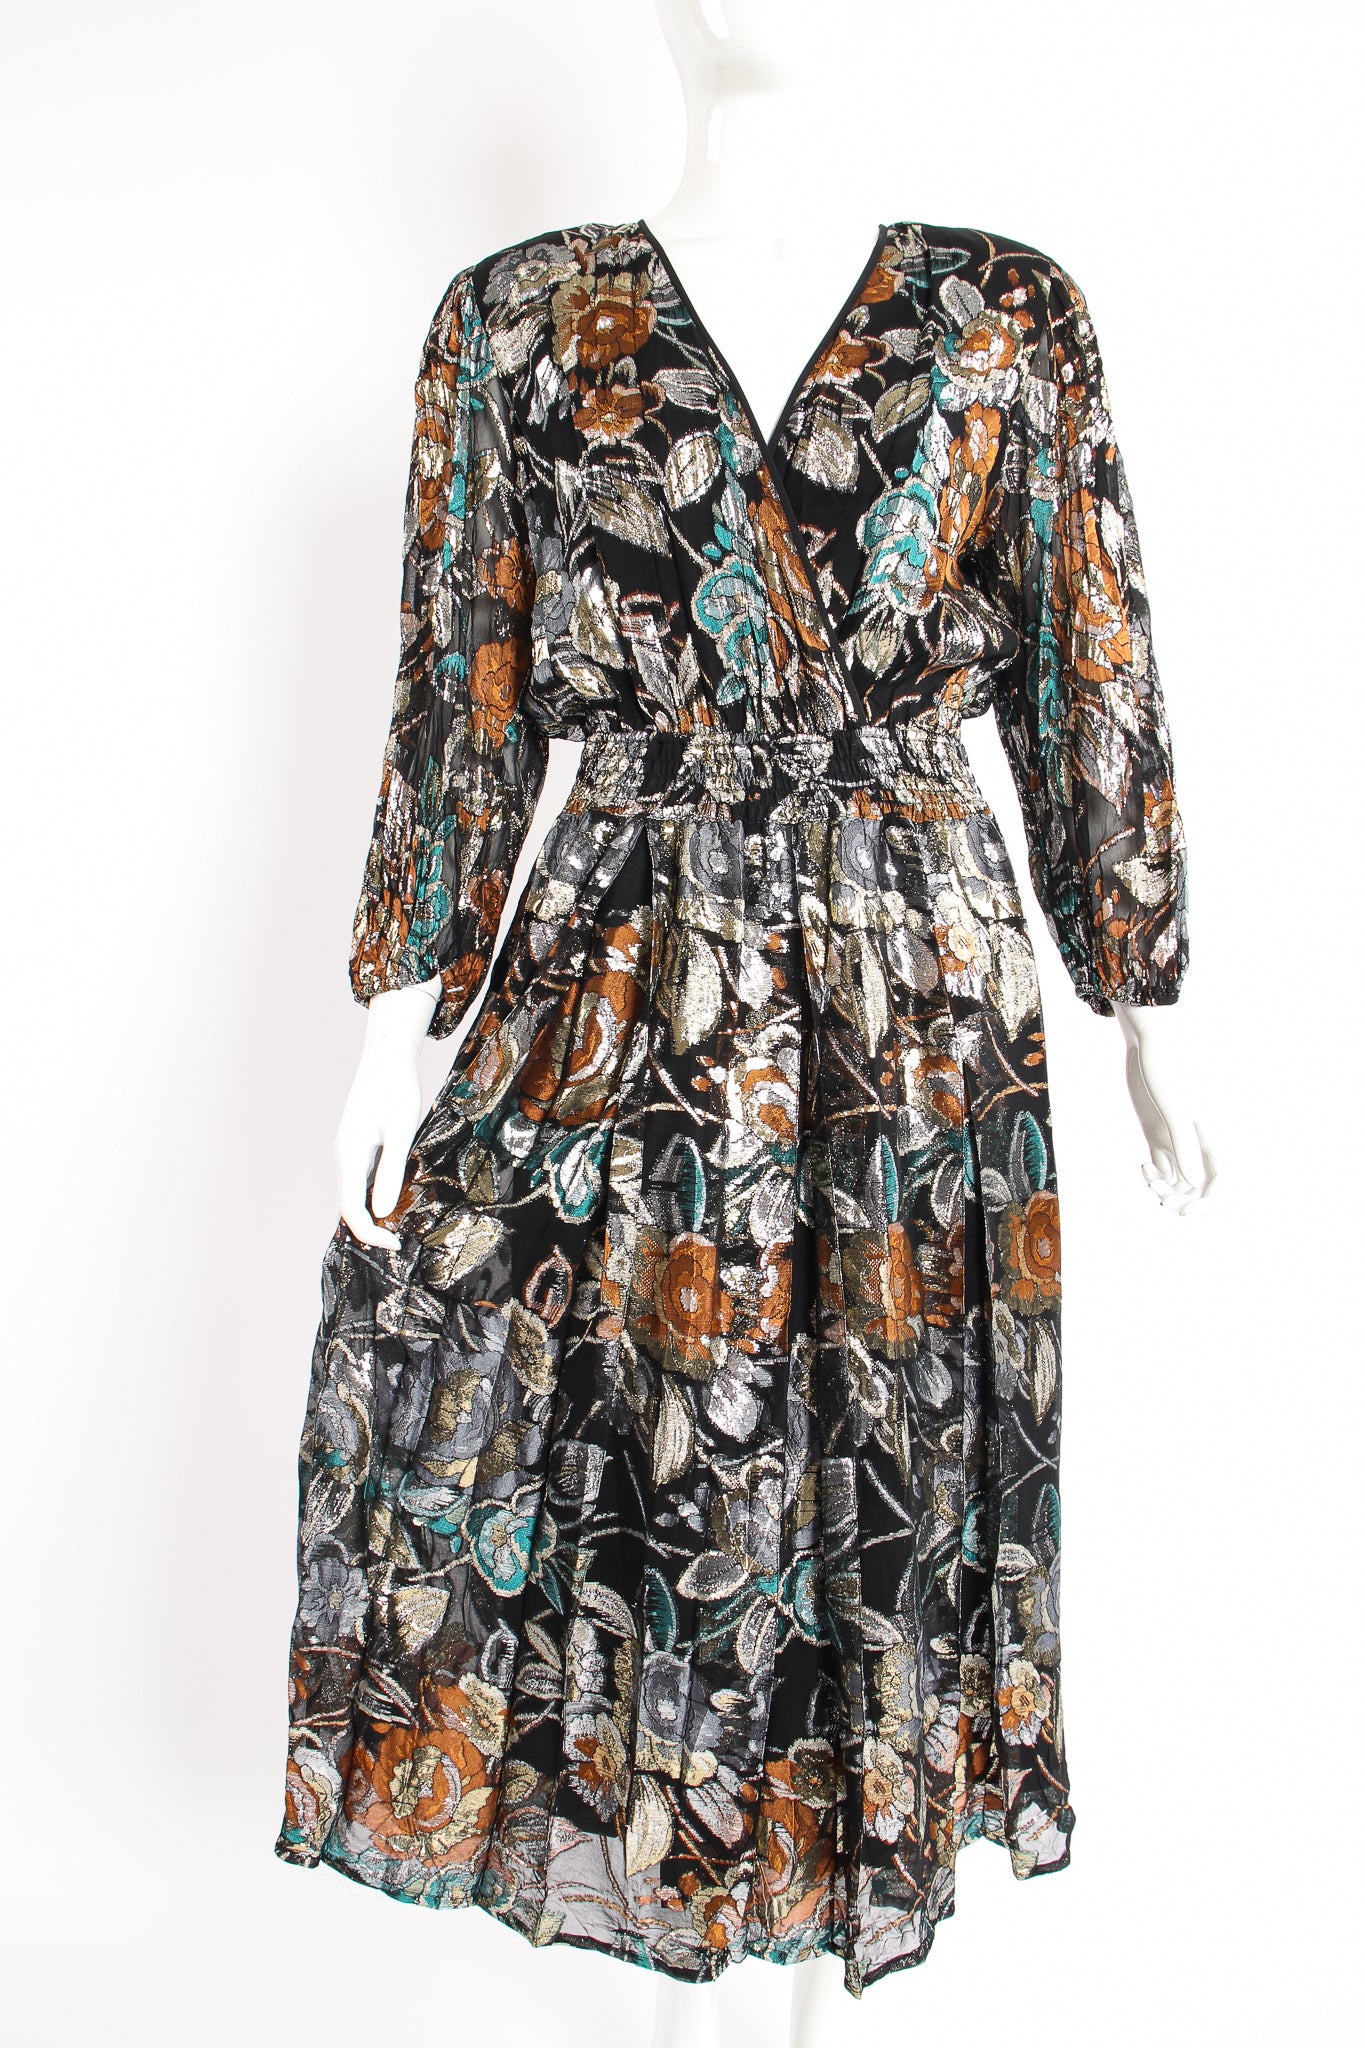 Vintage Diane Freis Floral Brocaded Chiffon Dress on Mannequin crop at Recess Los Angeles